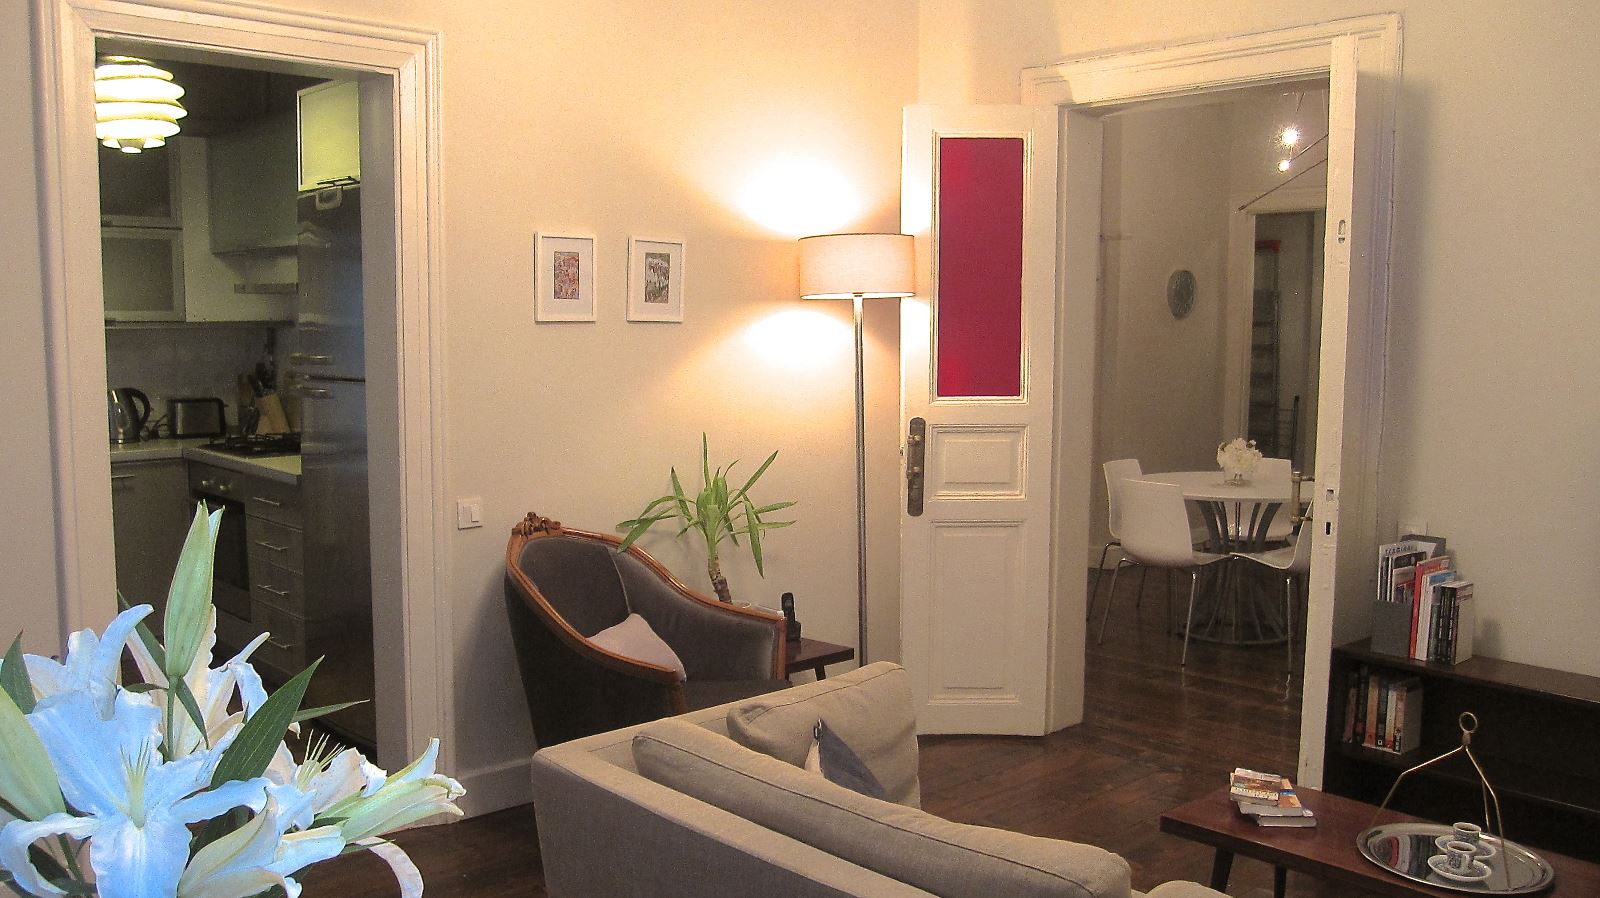 Newly renovated and furnished two bedroom apartment for residential rent, located in Galata, Beyoglu, Istanbul